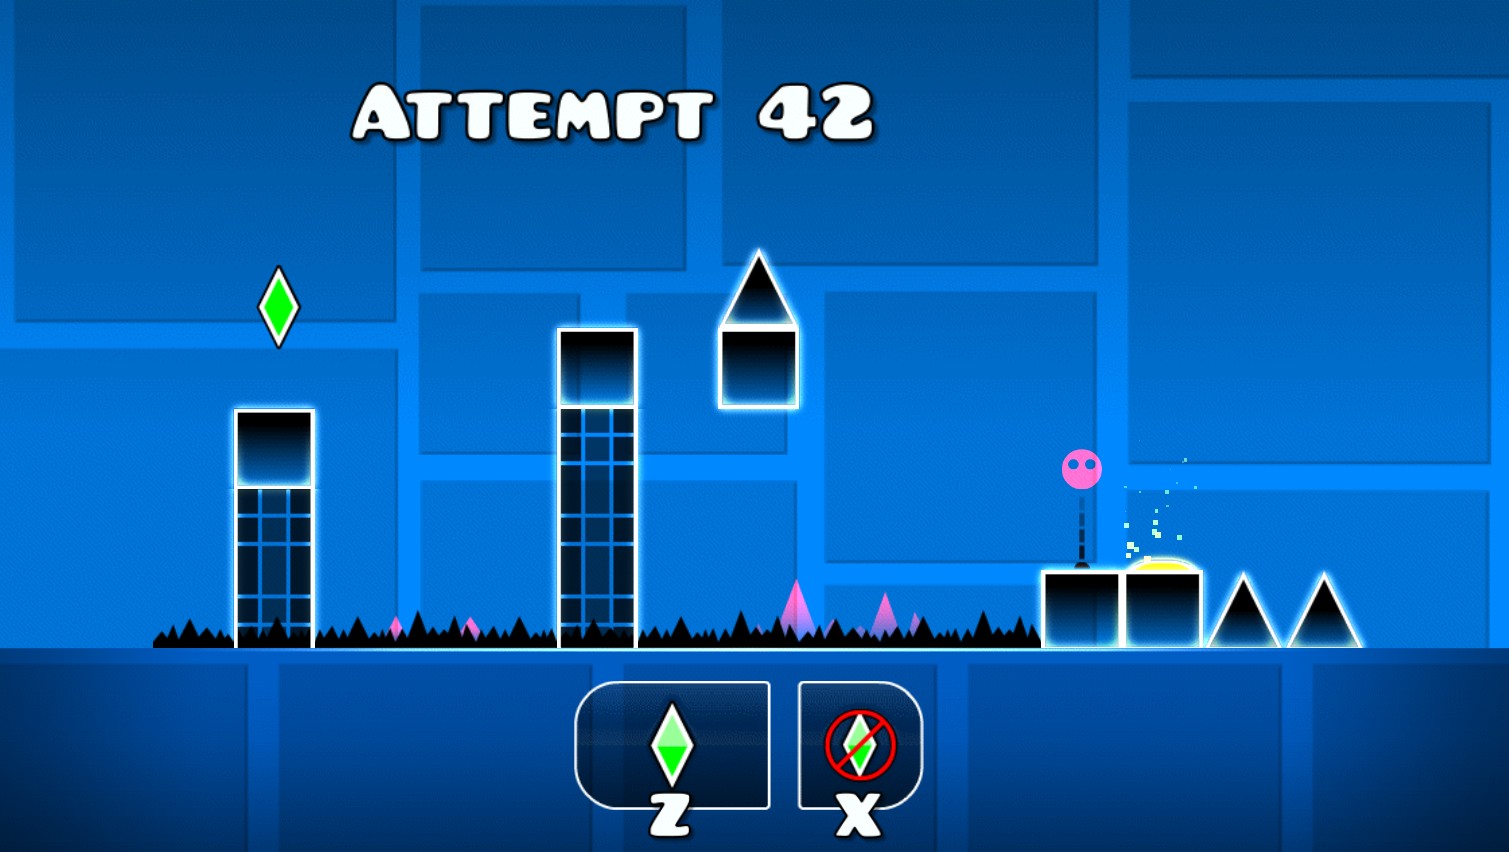 download geometry dash 2.11 for free